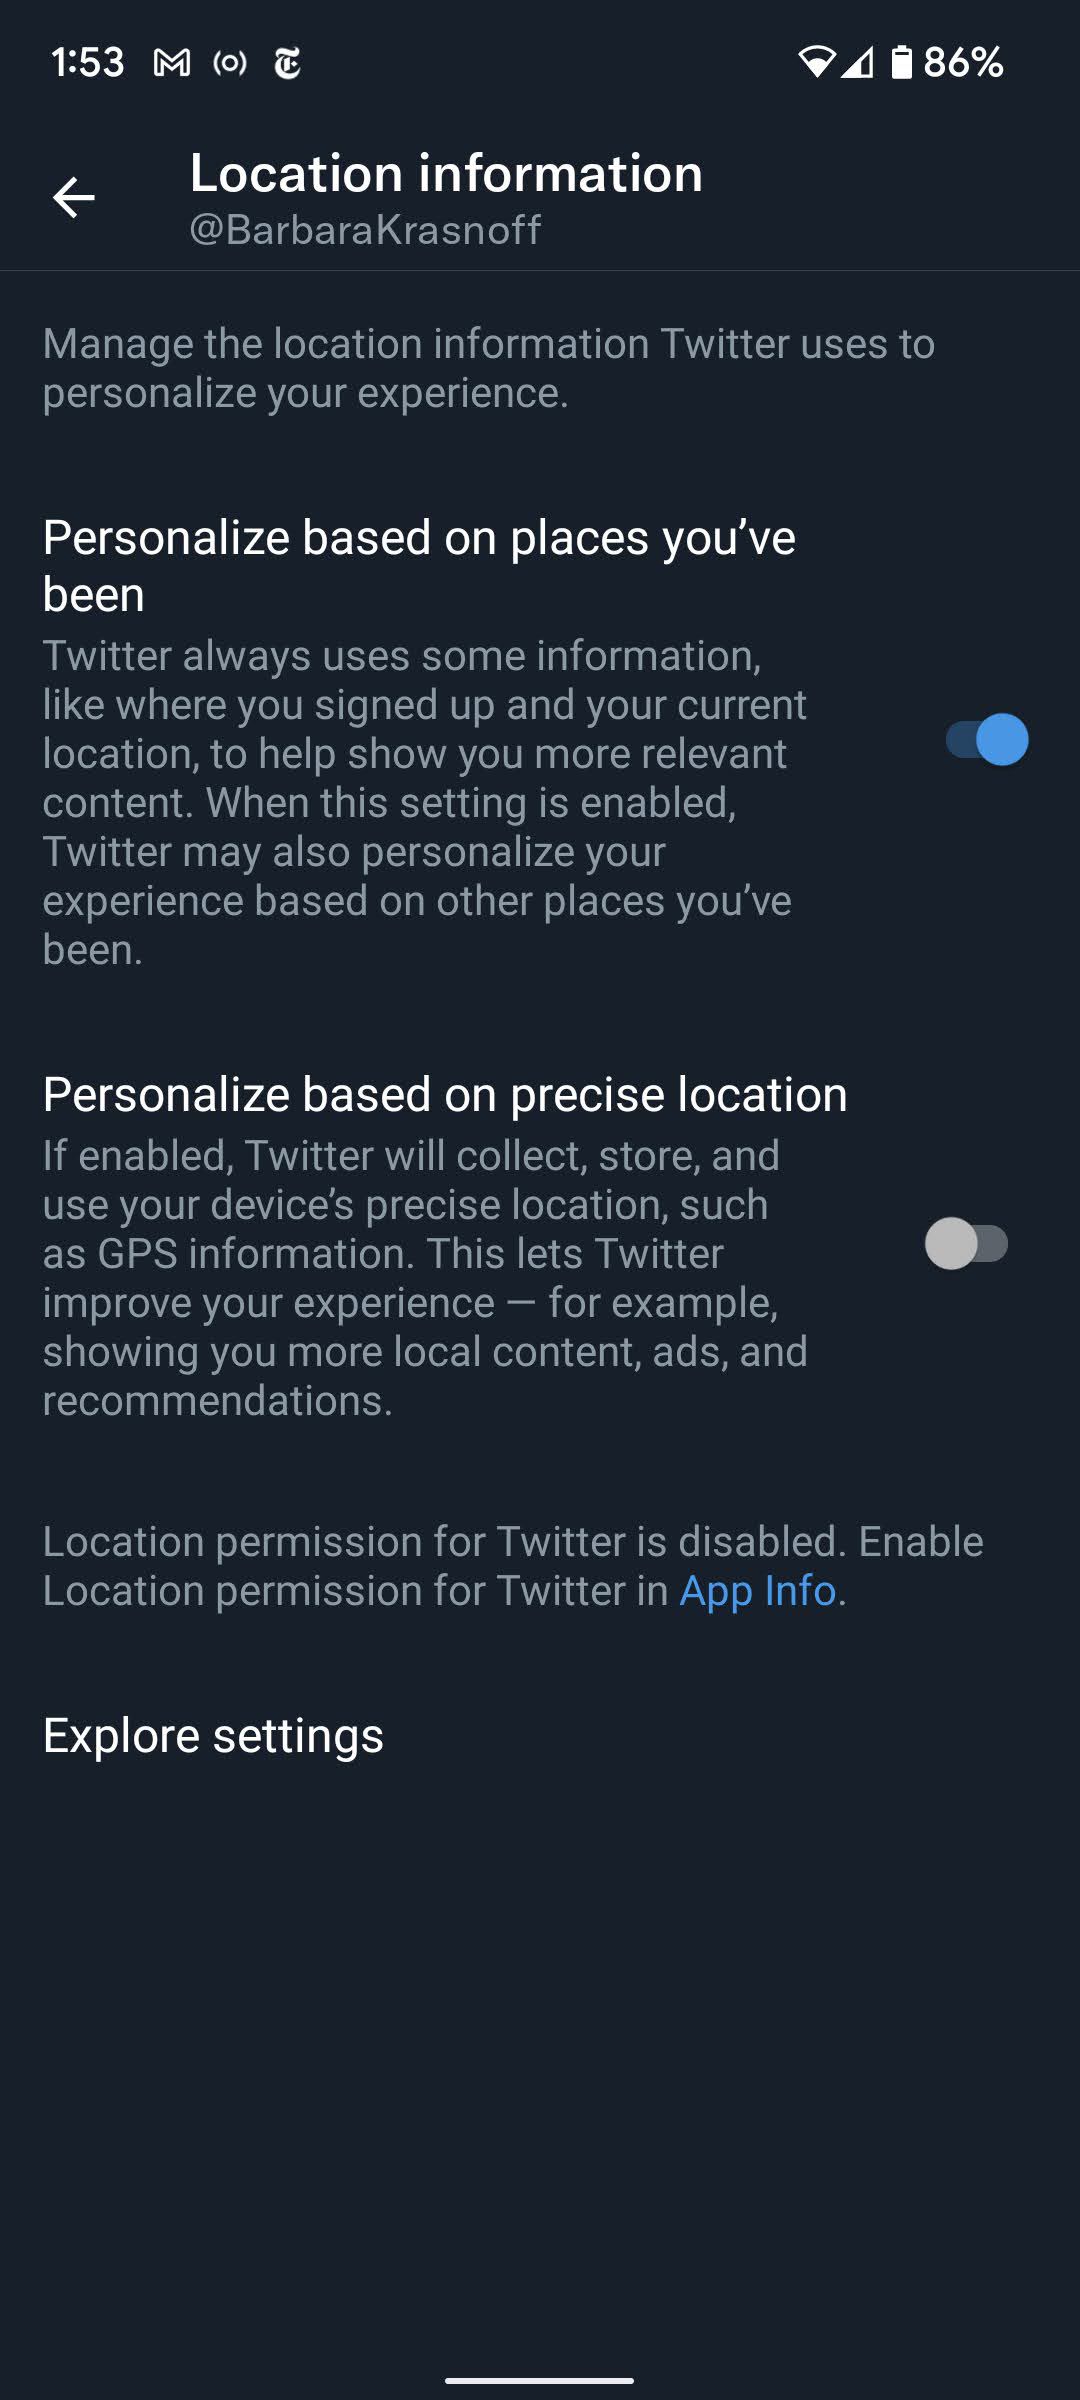 There are two location settings to toggle off.